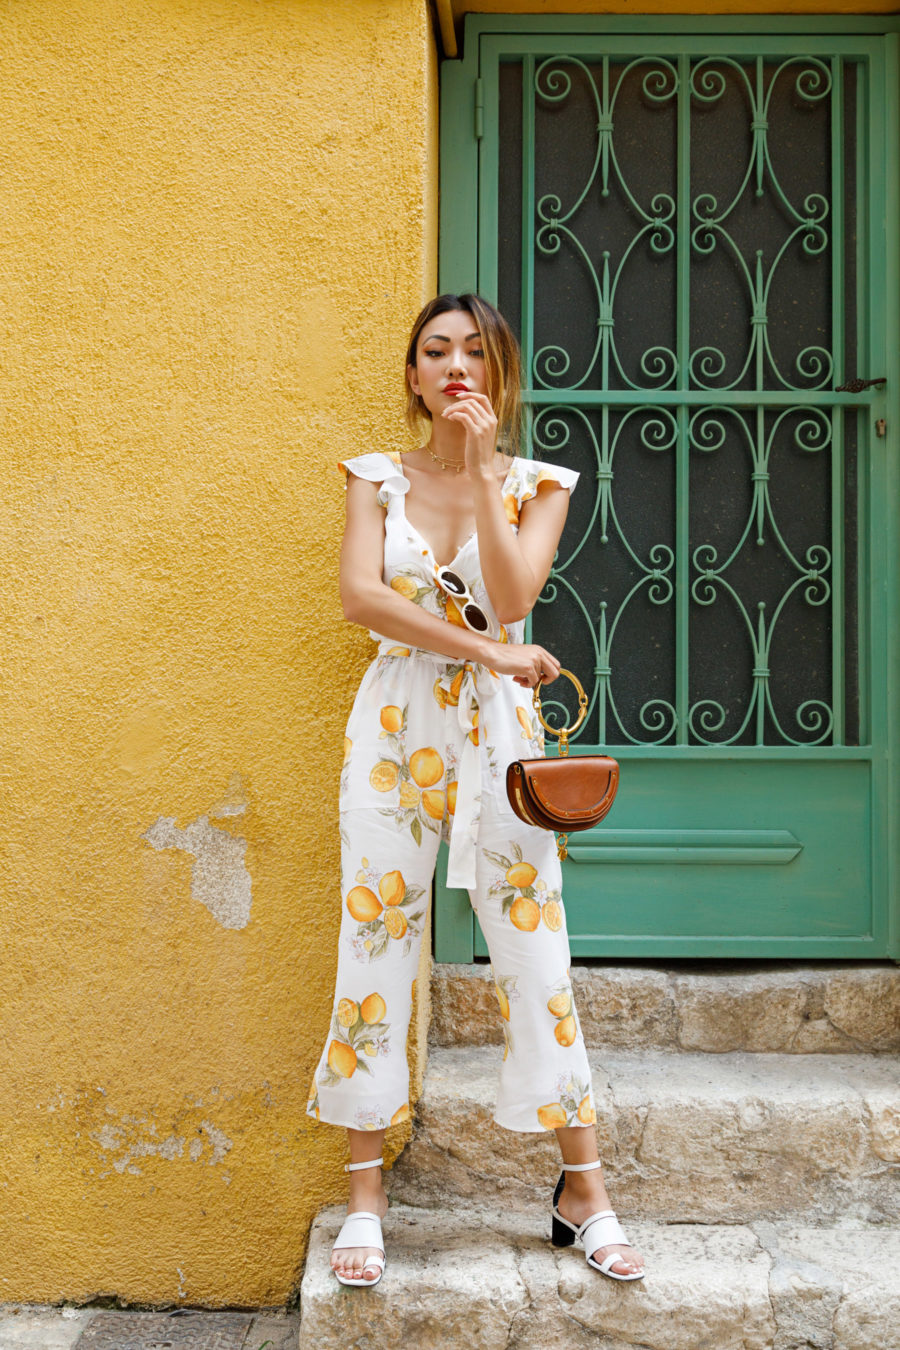 INSTAGRAM OUTFITS ROUND UP: IN PROVENCE // NotJessFashion.com